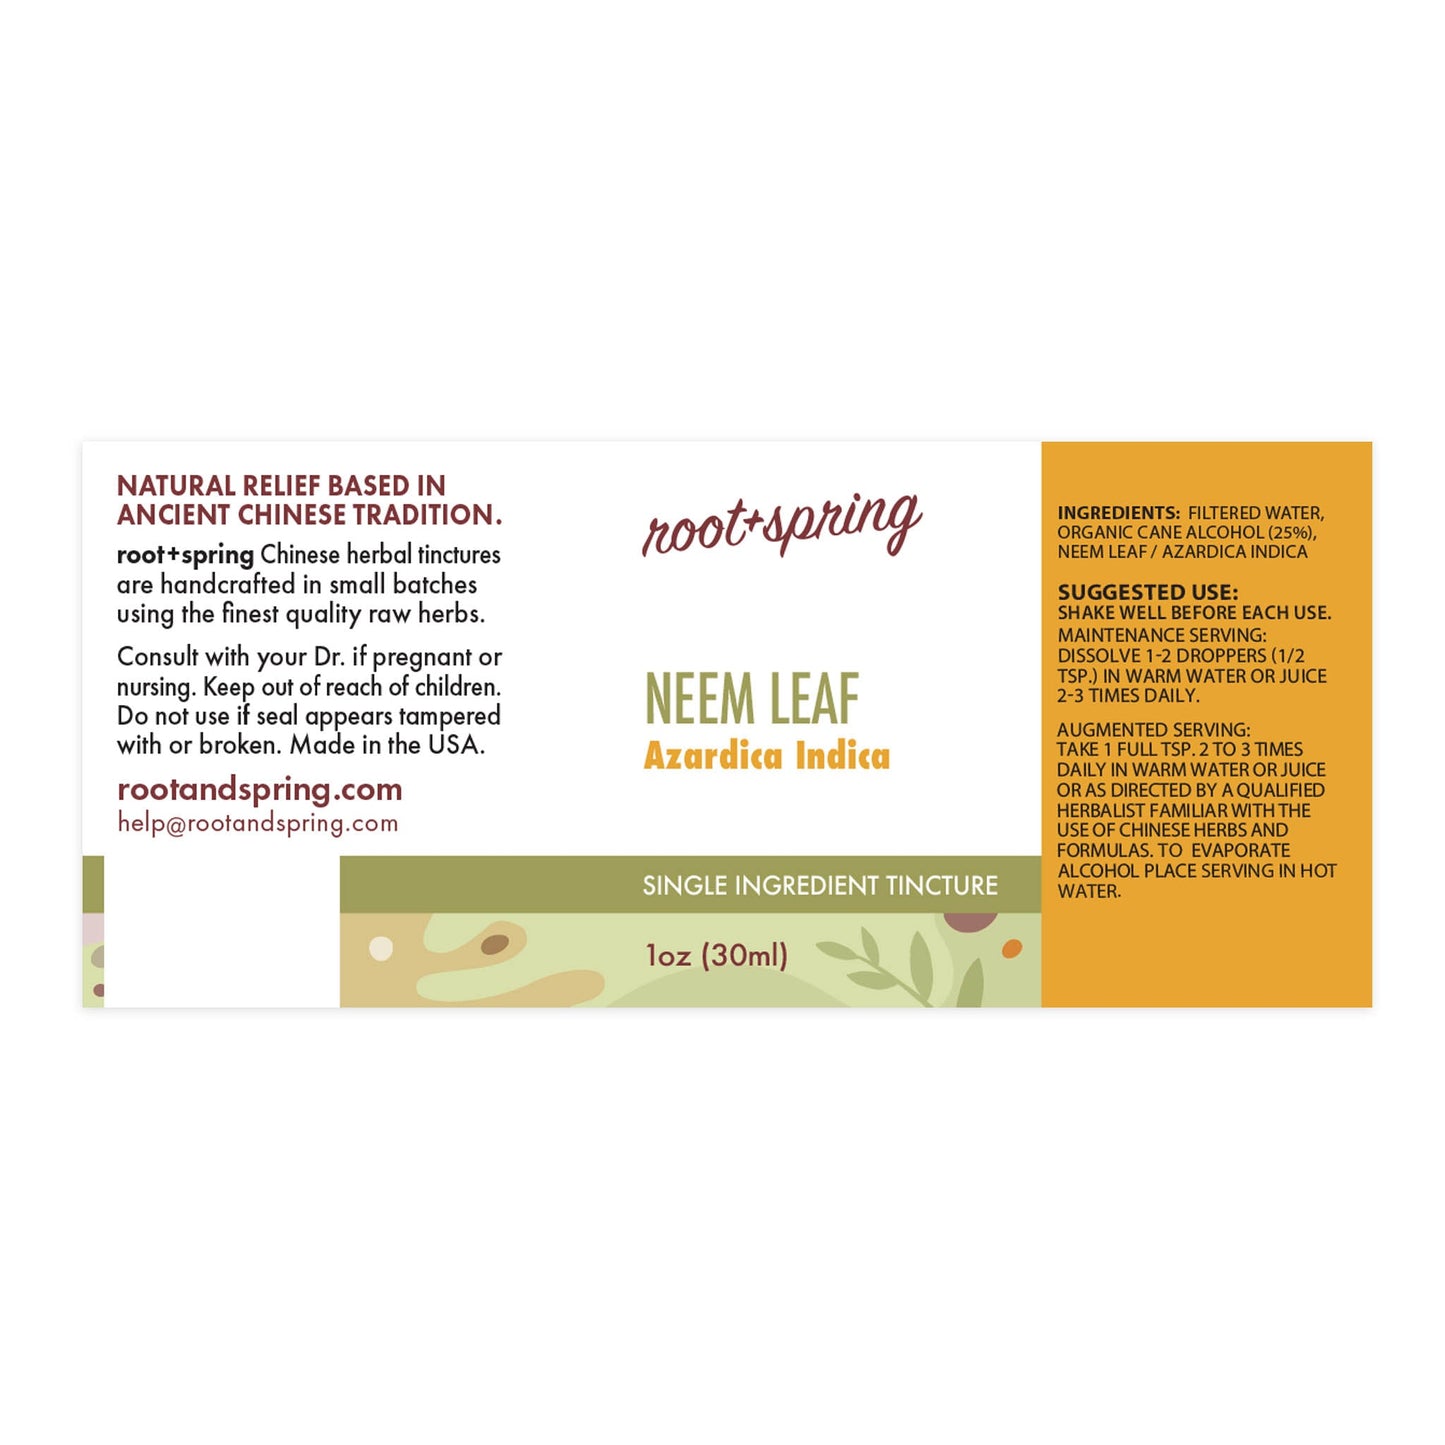 Label of Neem Leaf ( Azardica Indica) - Herbal Tincture by root + spring